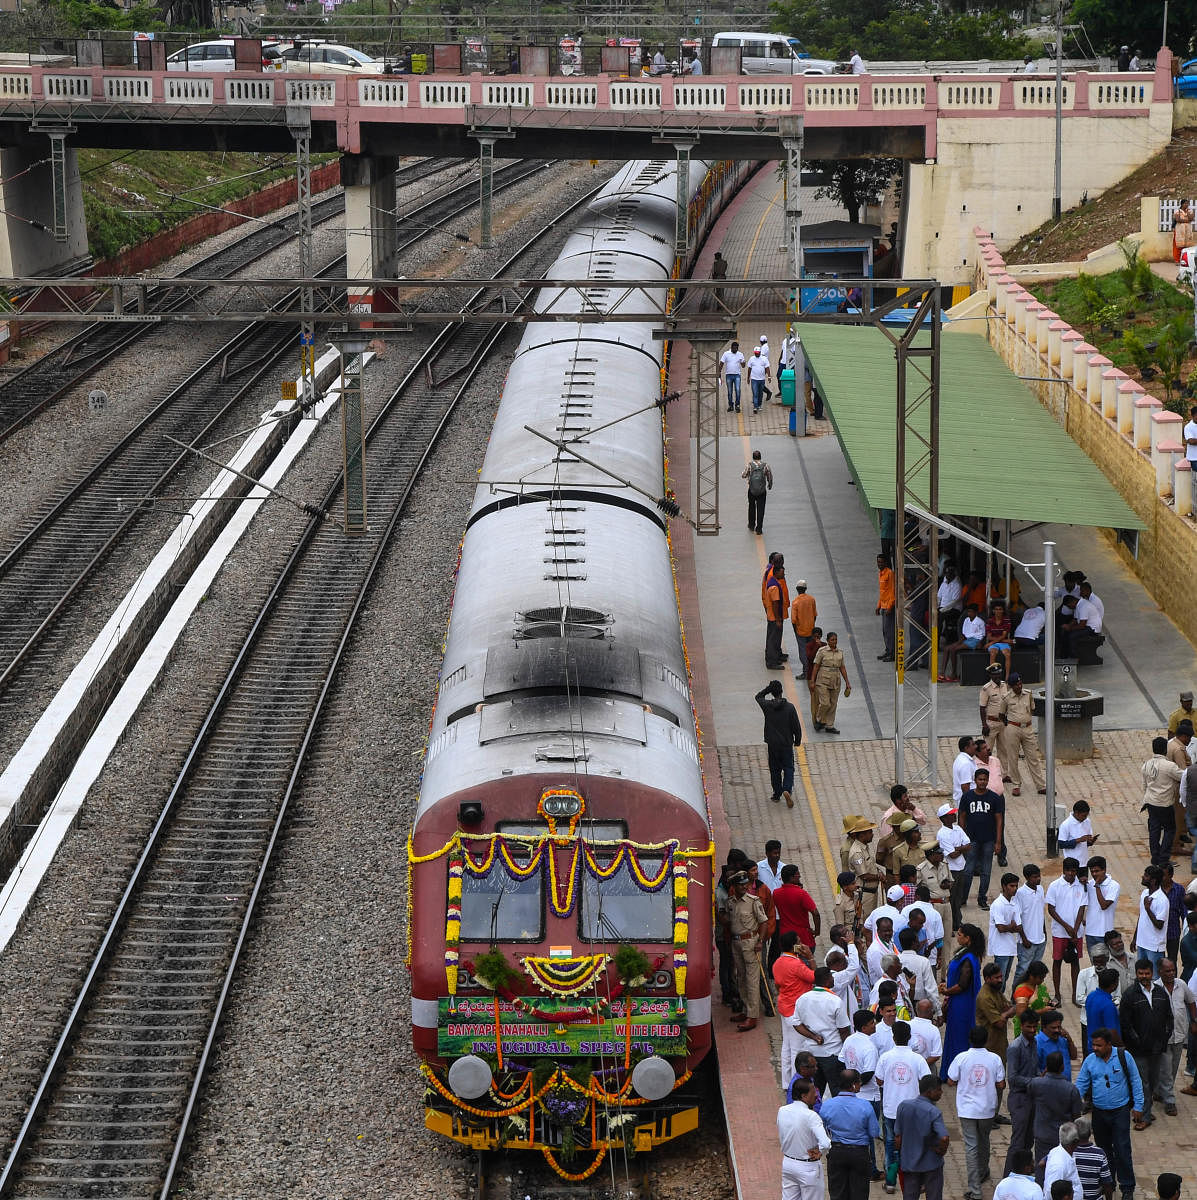 The switch to the suburban trains is more pronounced on the city's congested IT corridors that includes Carmelaram, Bellandur, Outer Ring Road, Whitefield, Kadugodi and other locations in East Bengaluru.